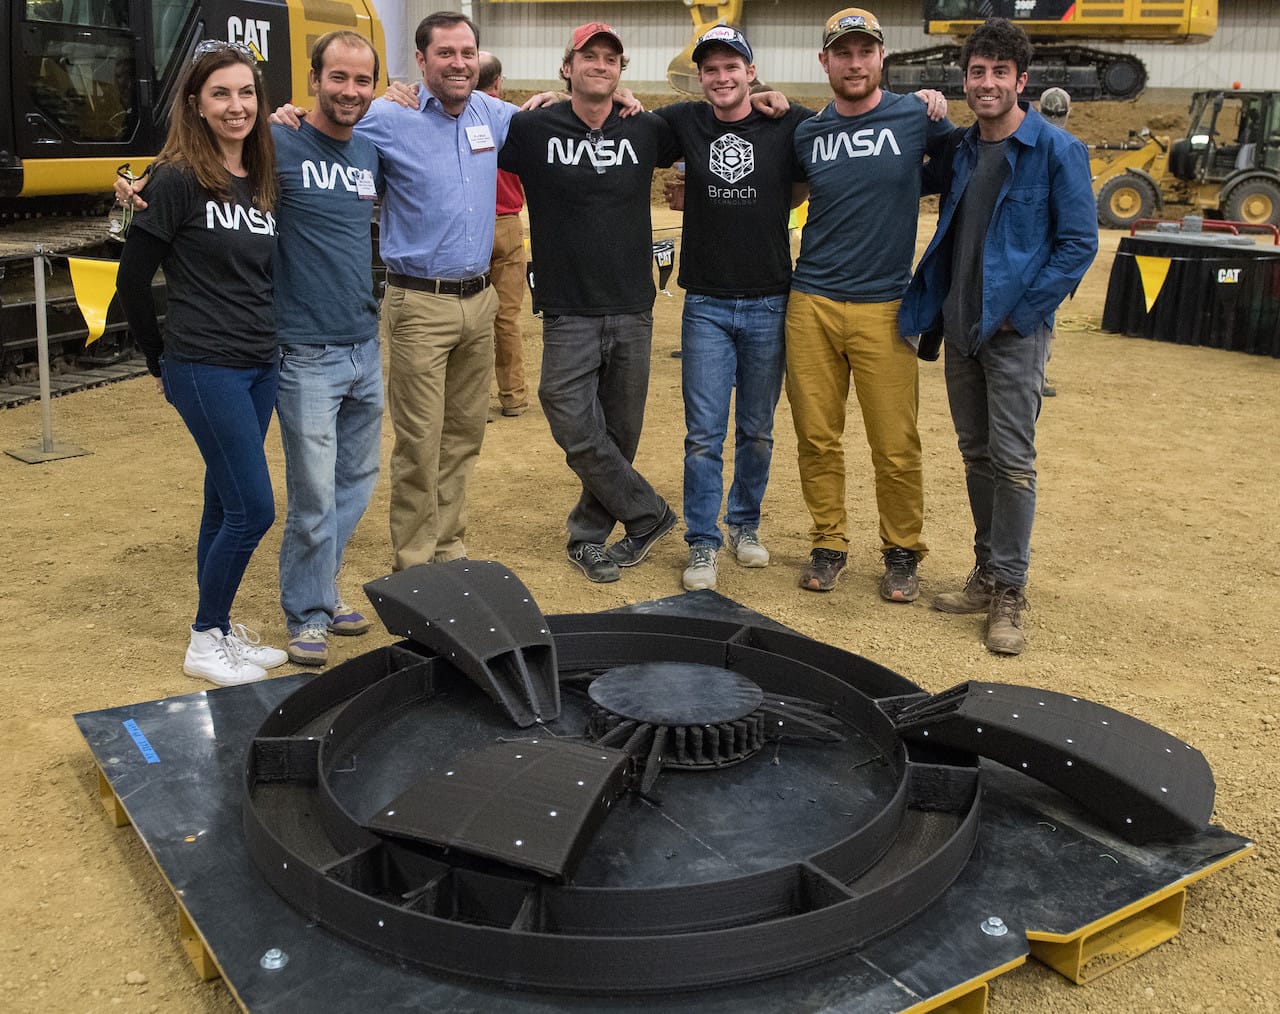  The winners of the latest phase in NASA's ongoing 3D Printed Challenge. 